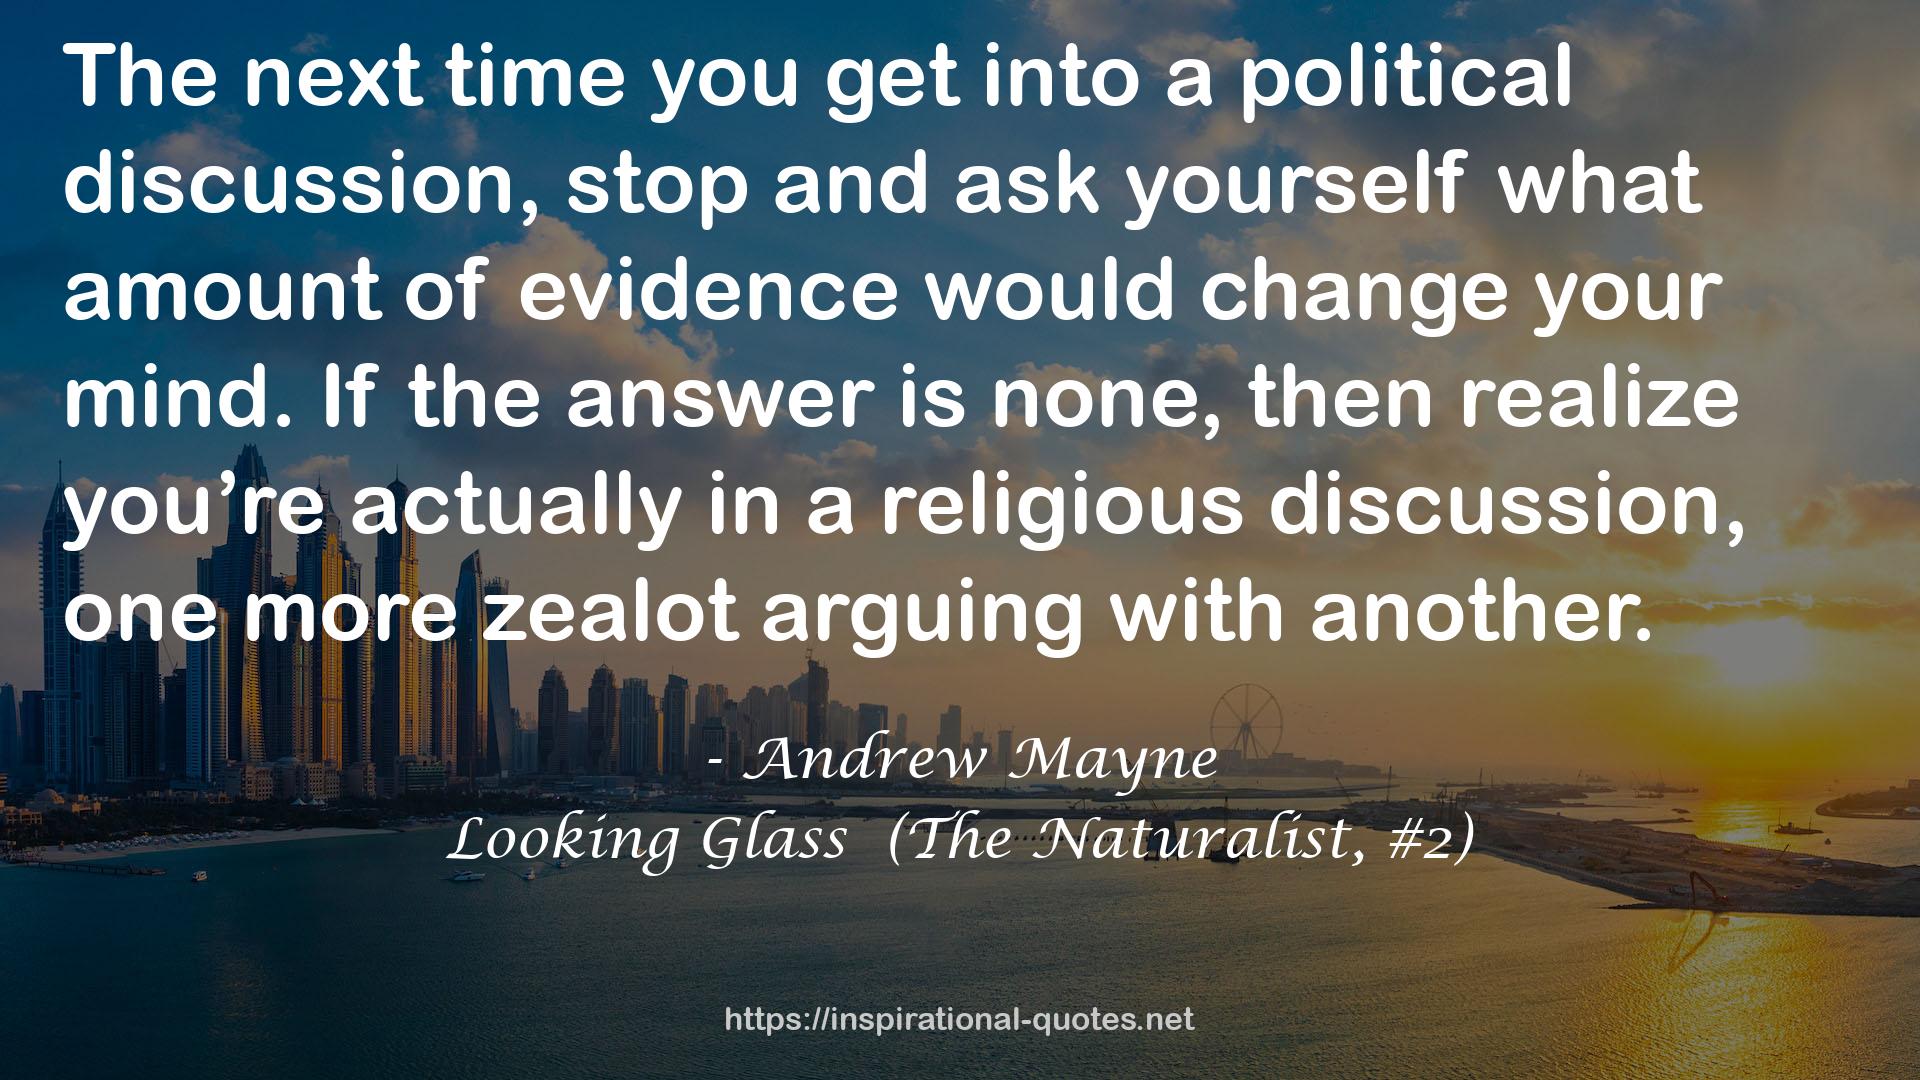 Looking Glass  (The Naturalist, #2) QUOTES